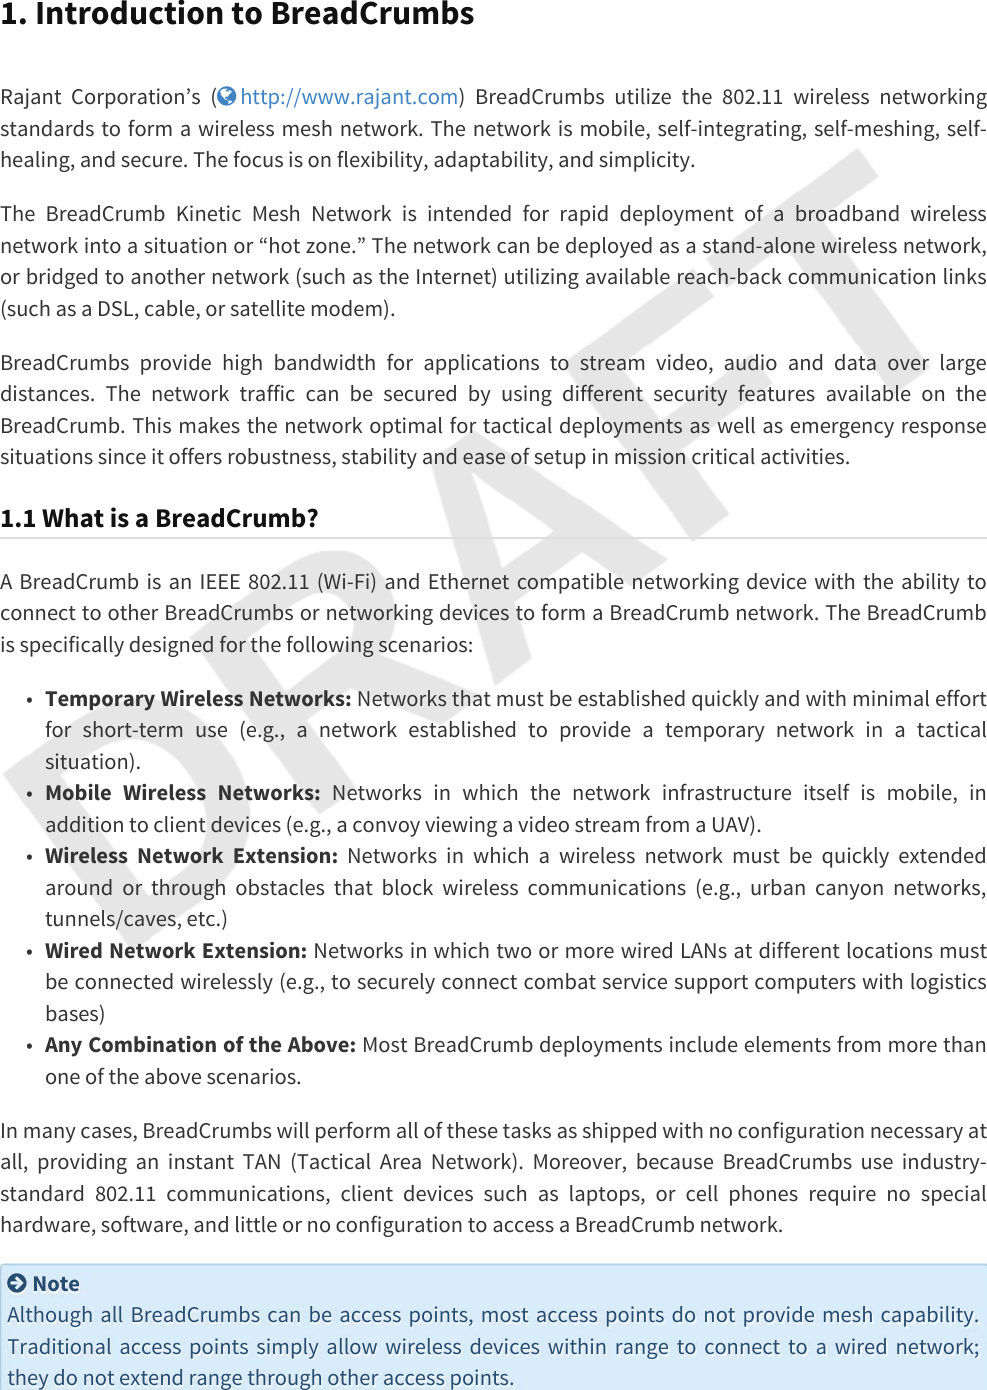 1. Introduction to BreadCrumbsRajant Corporation’s ( http://www.rajant.com) BreadCrumbs utilize the 802.11 wireless networking standards to form a wireless mesh network. The network is mobile, self-integrating, self-meshing, self-healing, and secure. The focus is on flexibility, adaptability, and simplicity.The BreadCrumb Kinetic Mesh Network is intended for rapid deployment of a broadband wireless network into a situation or “hot zone.” The network can be deployed as a stand-alone wireless network, or bridged to another network (such as the Internet) utilizing available reach-back communication links (such as a DSL, cable, or satellite modem).BreadCrumbs provide high bandwidth for applications to stream video, audio and data over large distances. The network traffic can be secured by using different security features available on the BreadCrumb. This makes the network optimal for tactical deployments as well as emergency response situations since it offers robustness, stability and ease of setup in mission critical activities.1.1 What is a BreadCrumb?A BreadCrumb is an IEEE 802.11 (Wi-Fi) and Ethernet compatible networking device with the ability to connect to other BreadCrumbs or networking devices to form a BreadCrumb network. The BreadCrumb is specifically designed for the following scenarios:•Temporary Wireless Networks: Networks that must be established quickly and with minimal effort for short-term use (e.g., a network established to provide a temporary network in a tactical situation).•Mobile Wireless Networks: Networks in which the network infrastructure itself is mobile, in addition to client devices (e.g., a convoy viewing a video stream from a UAV).•Wireless Network Extension: Networks in which a wireless network must be quickly extended around or through obstacles that block wireless communications (e.g., urban canyon networks, tunnels/caves, etc.)•Wired Network Extension: Networks in which two or more wired LANs at different locations must be connected wirelessly (e.g., to securely connect combat service support computers with logistics bases)•Any Combination of the Above: Most BreadCrumb deployments include elements from more than one of the above scenarios.In many cases, BreadCrumbs will perform all of these tasks as shipped with no configuration necessary at all, providing an instant TAN (Tactical Area Network). Moreover, because BreadCrumbs use industry-standard 802.11 communications, client devices such as laptops, or cell phones require no special hardware, software, and little or no configuration to access a BreadCrumb network. NoteAlthough all BreadCrumbs can be access points, most access points do not provide mesh capability. Traditional access points simply allow wireless devices within range to connect to a wired network; they do not extend range through other access points.